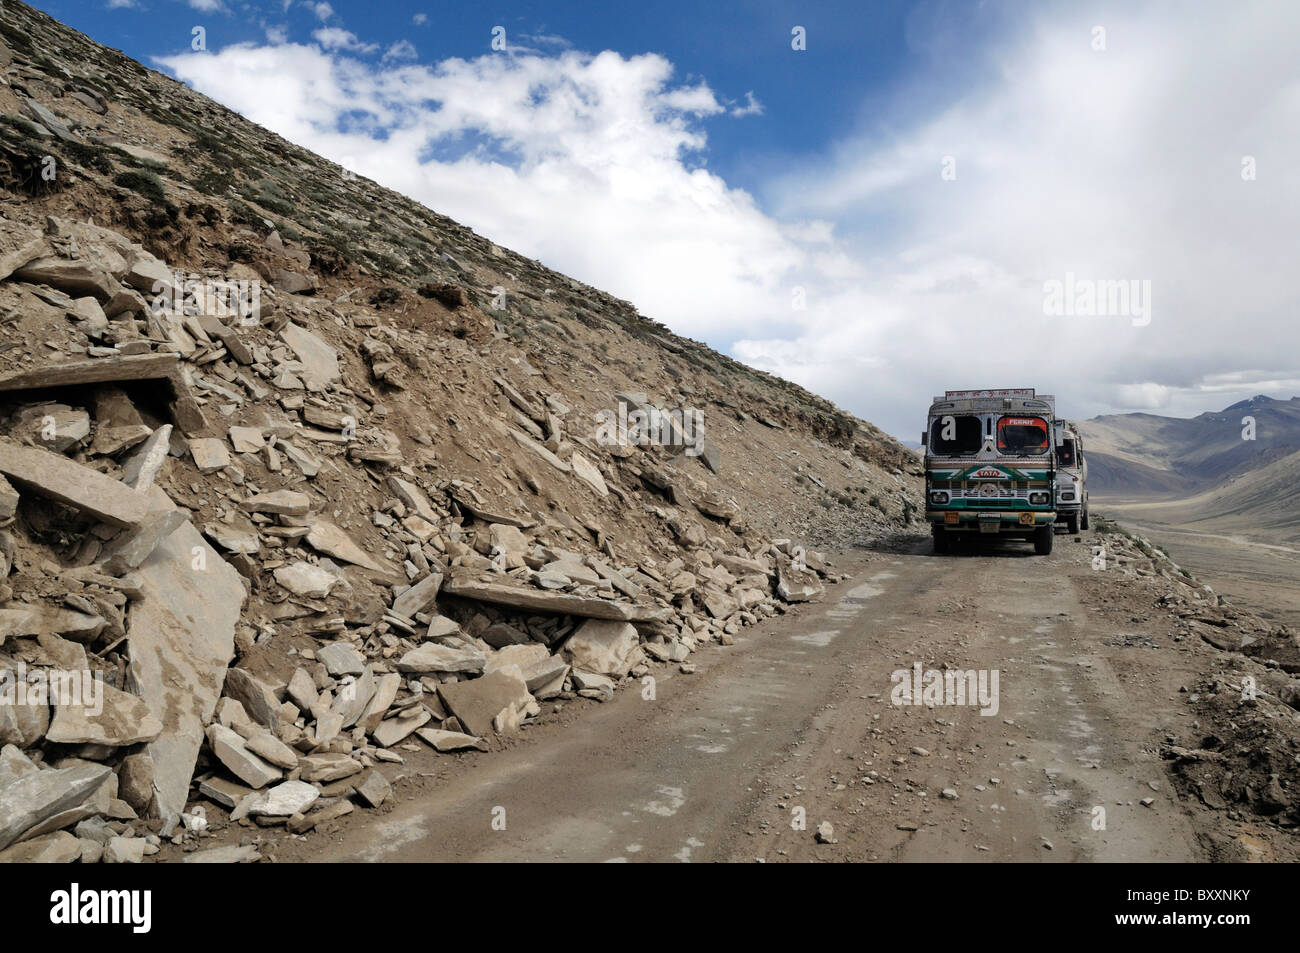 Two TATA trucks on the 'Himalaya Highway'. These trucks are used to transport goods to the outer regions of the Himalaya. Stock Photo